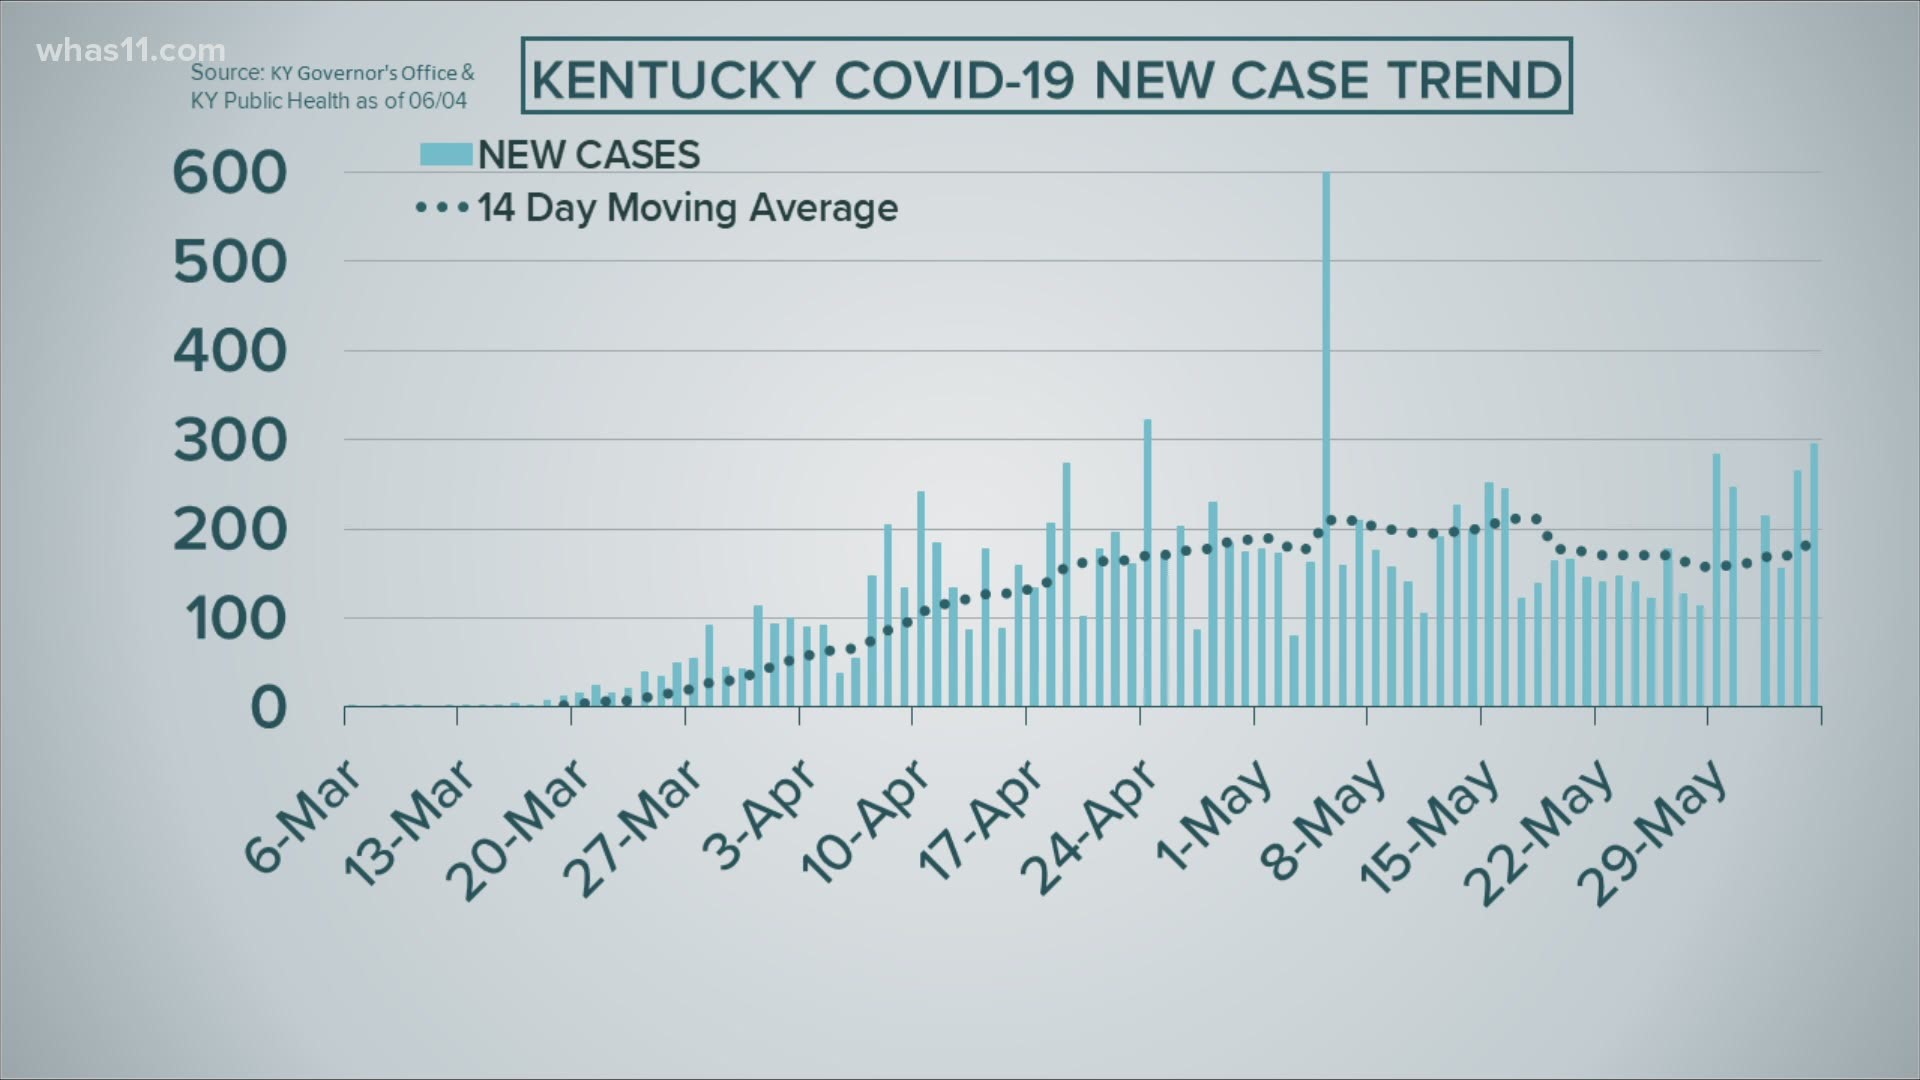 Kentucky has seen more cases over the past few days